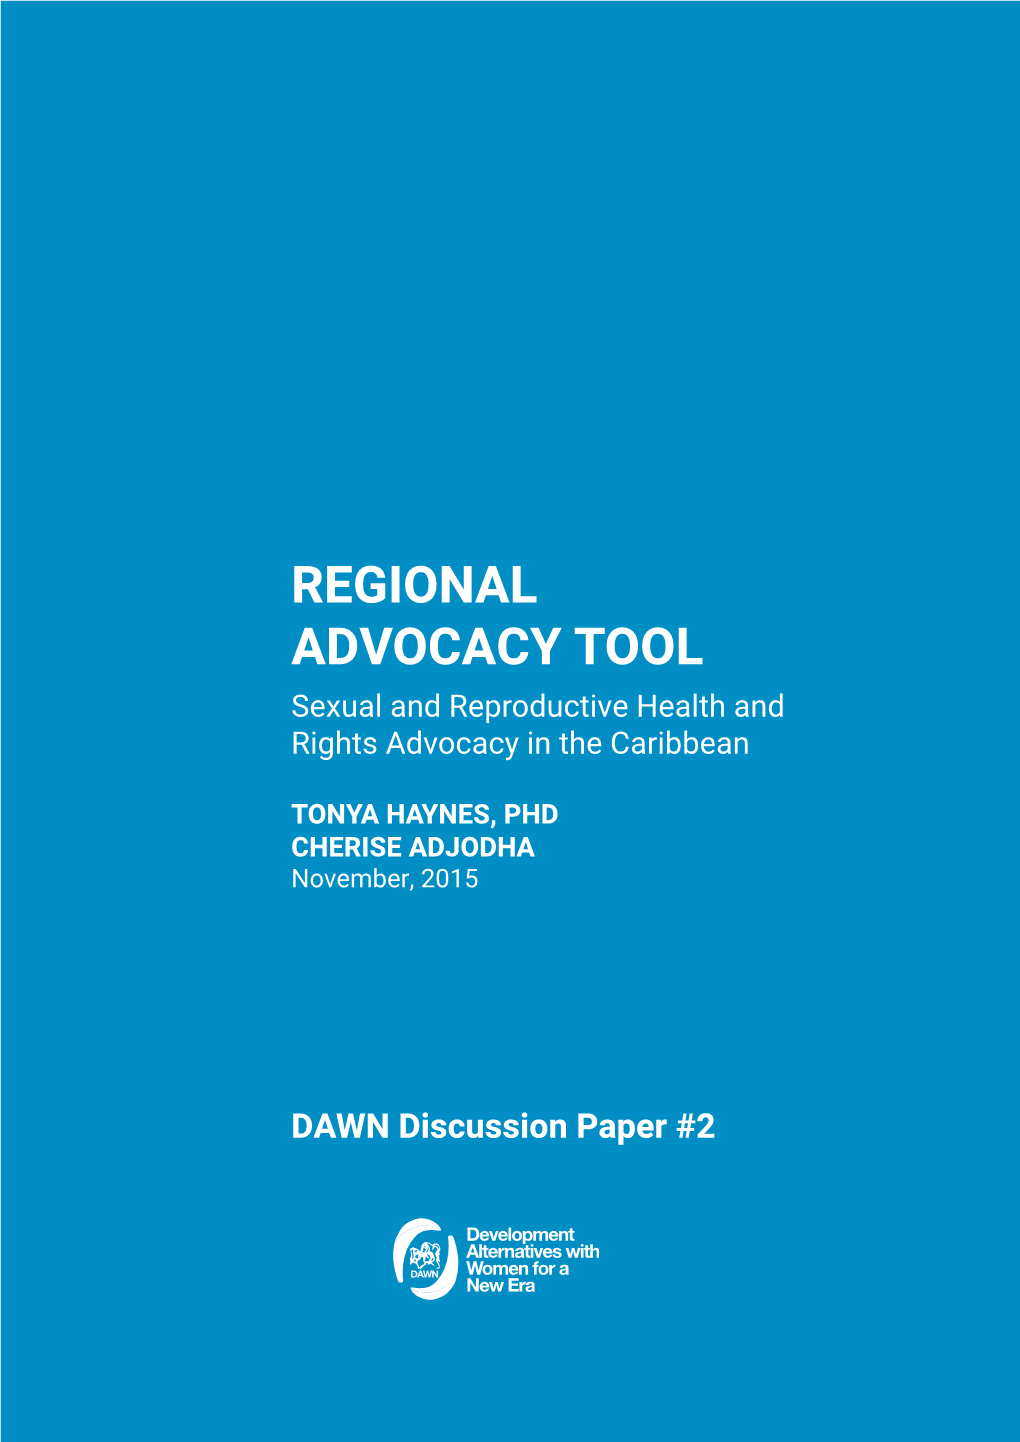 REGIONAL ADVOCACY TOOL Sexual and Reproductive Health and Rights Advocacy in the Caribbean